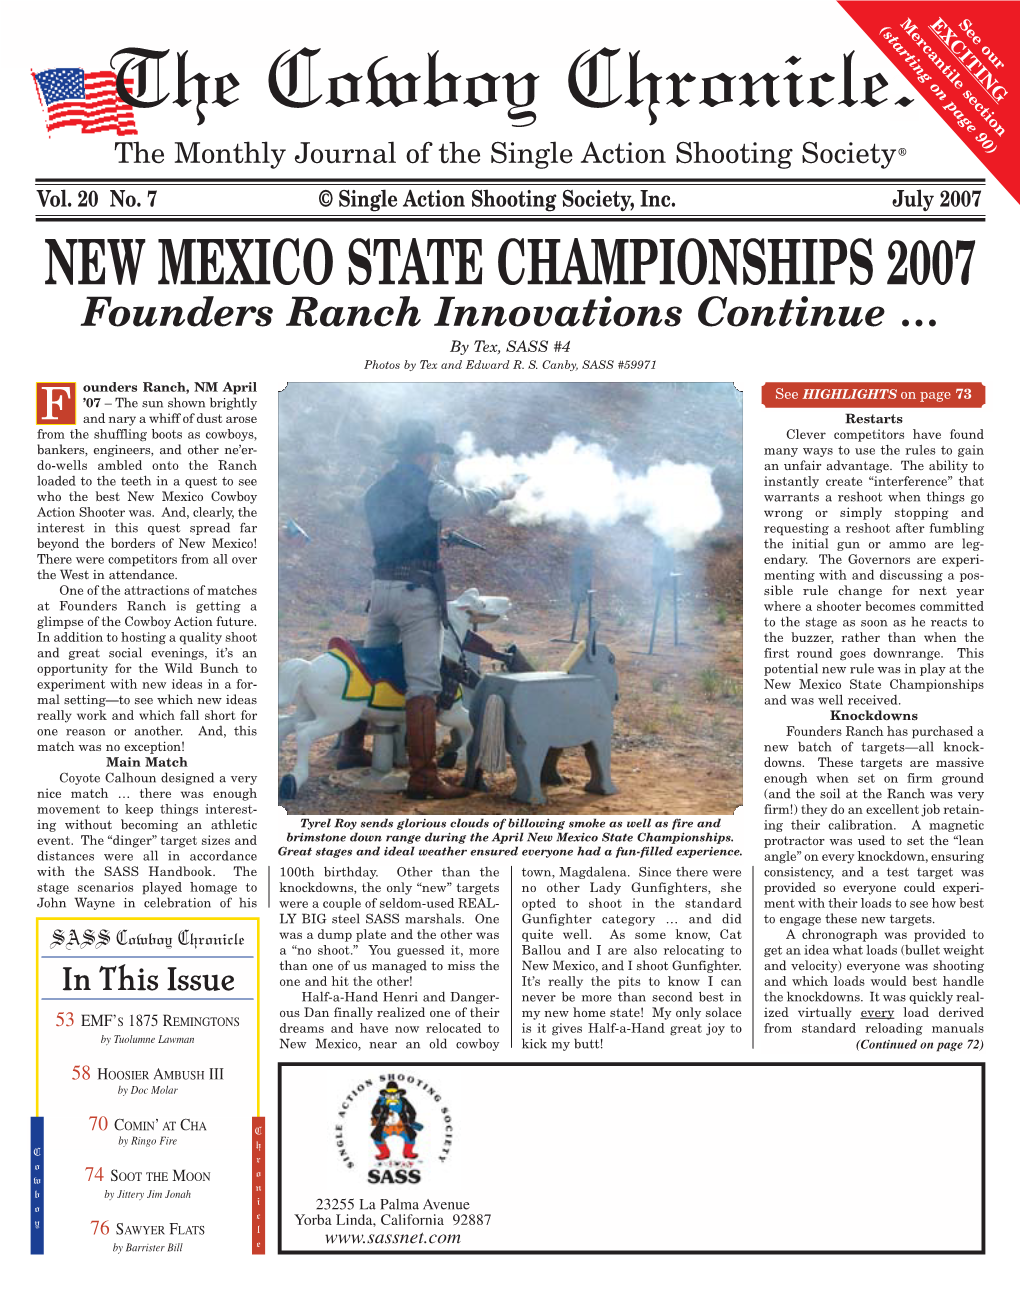 NEW MEXICO STATE CHAMPIONSHIPS 2007 Founders Ranch Innovations Continue … by Tex, SASS #4 Photos by Tex and Edward R